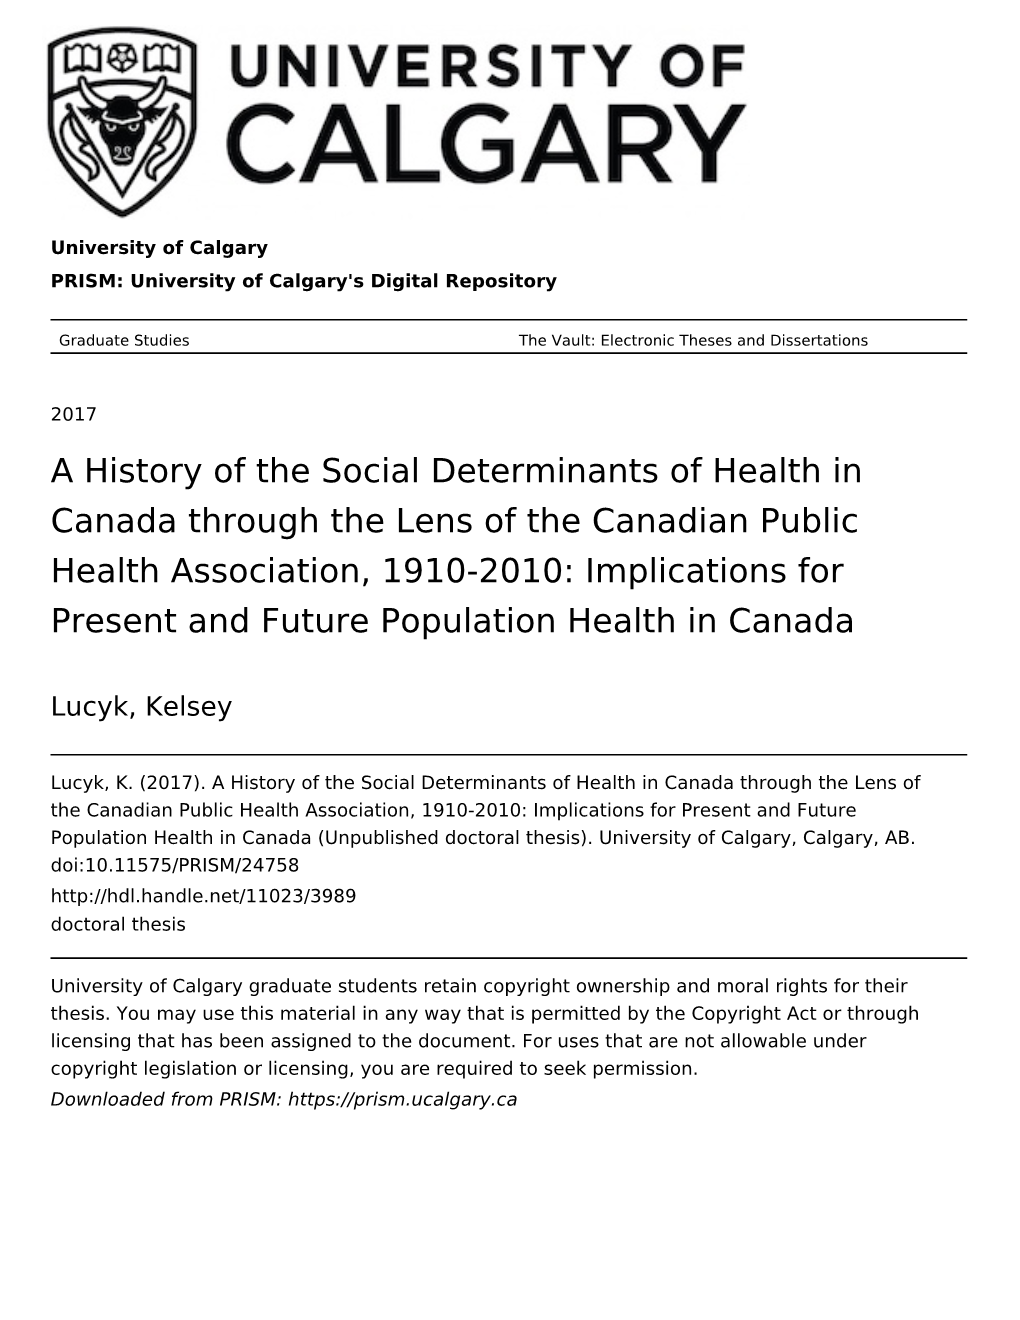 A History of the Social Determinants of Health in Canada Through the Lens of the Canadian Public Health Association, 1910-2010